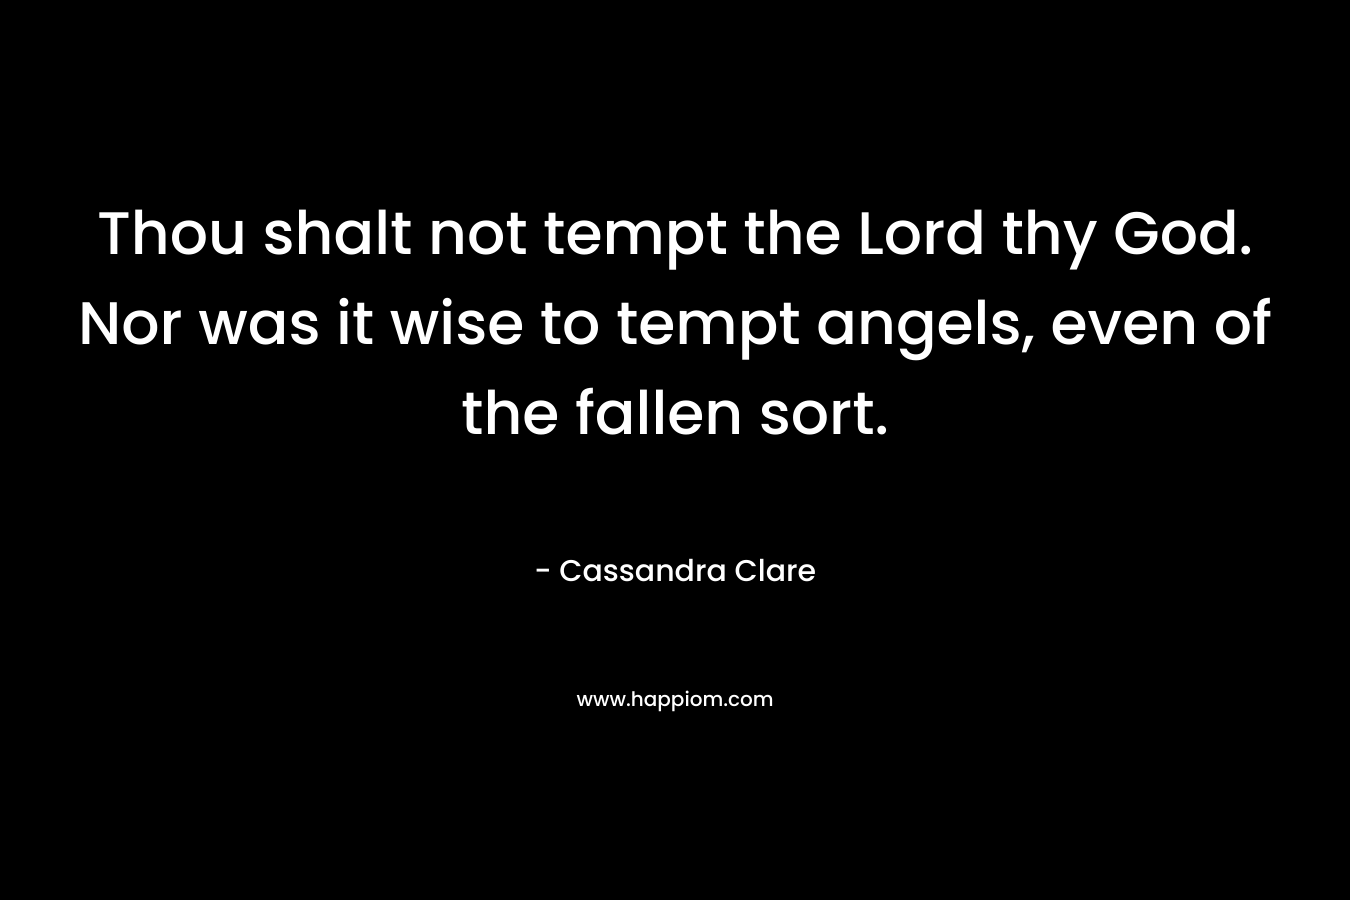 Thou shalt not tempt the Lord thy God. Nor was it wise to tempt angels, even of the fallen sort. – Cassandra Clare